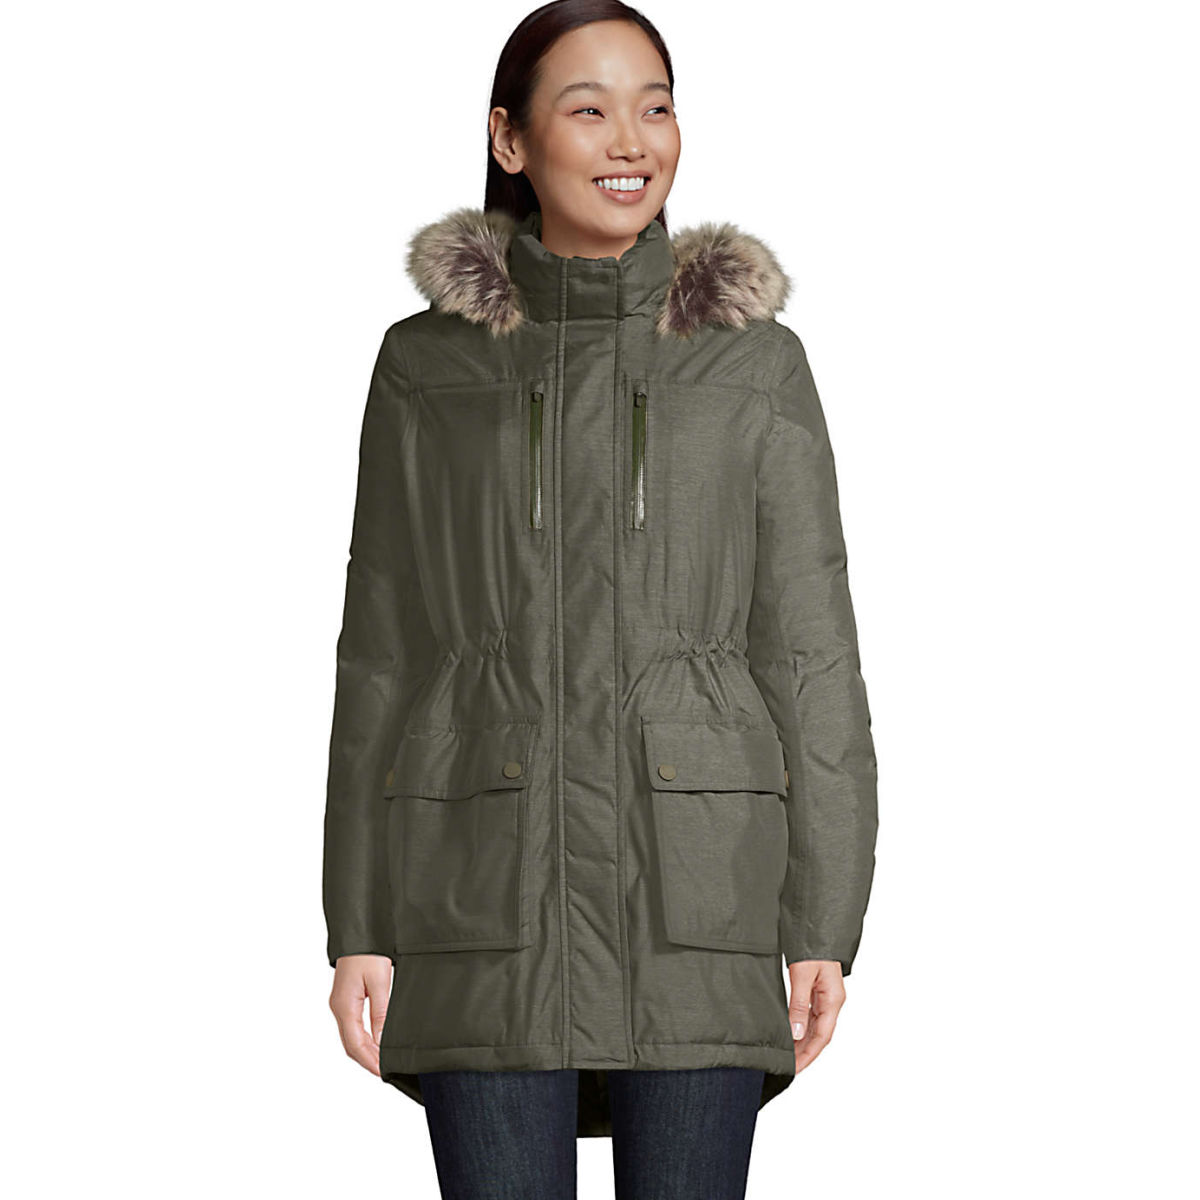 Land's End Expedition Waterproof Women's Down Winter Parka